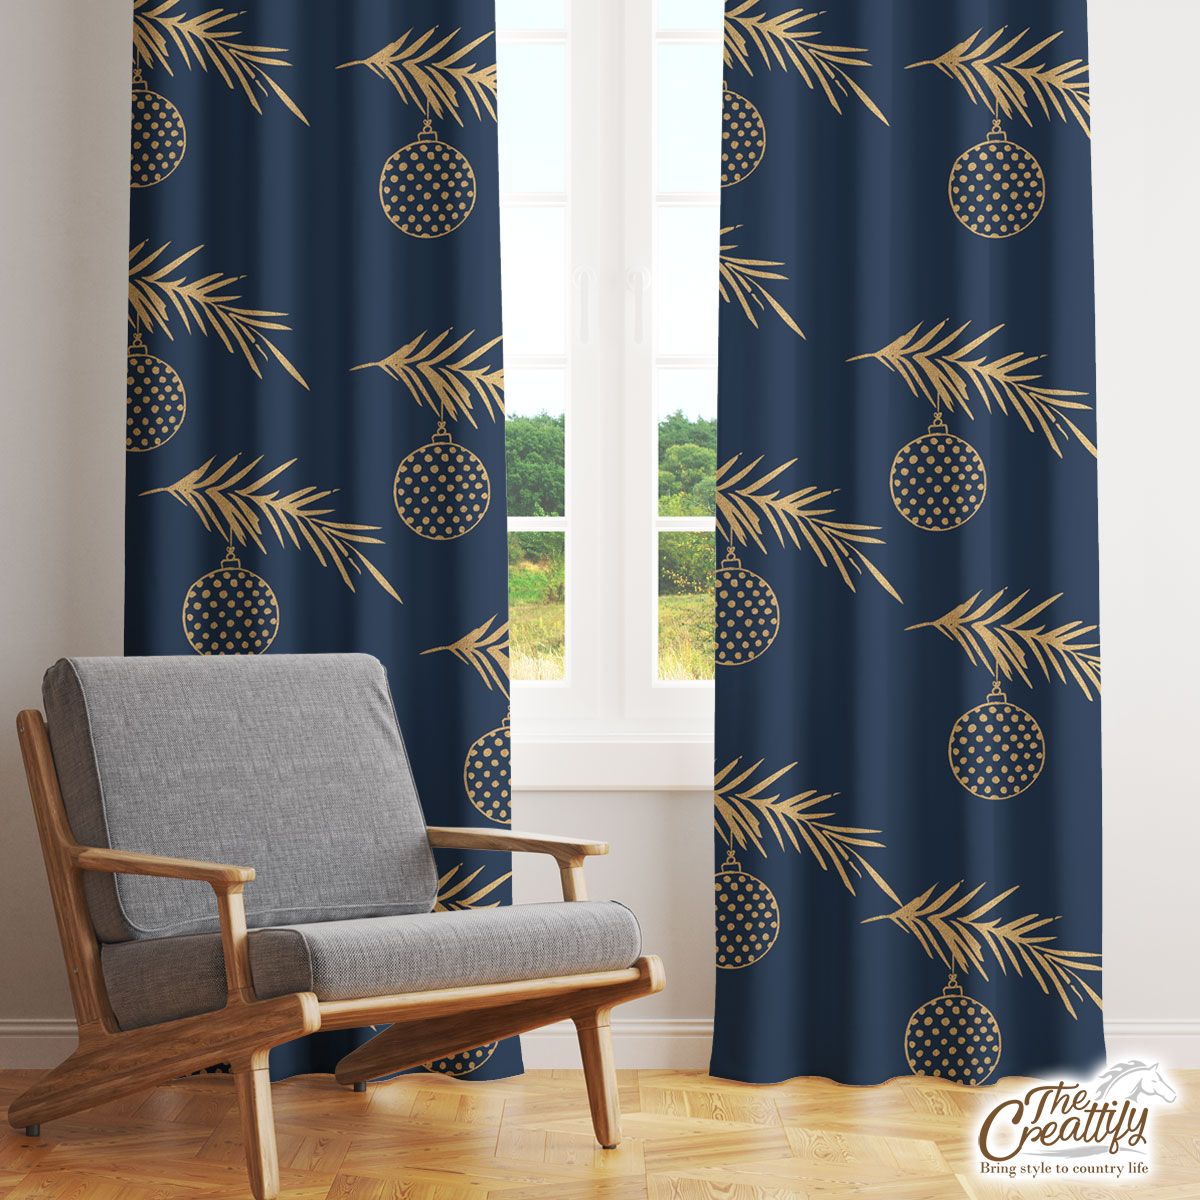 Christmas Balls With Long Leaf Pine Pattern Window Curtain